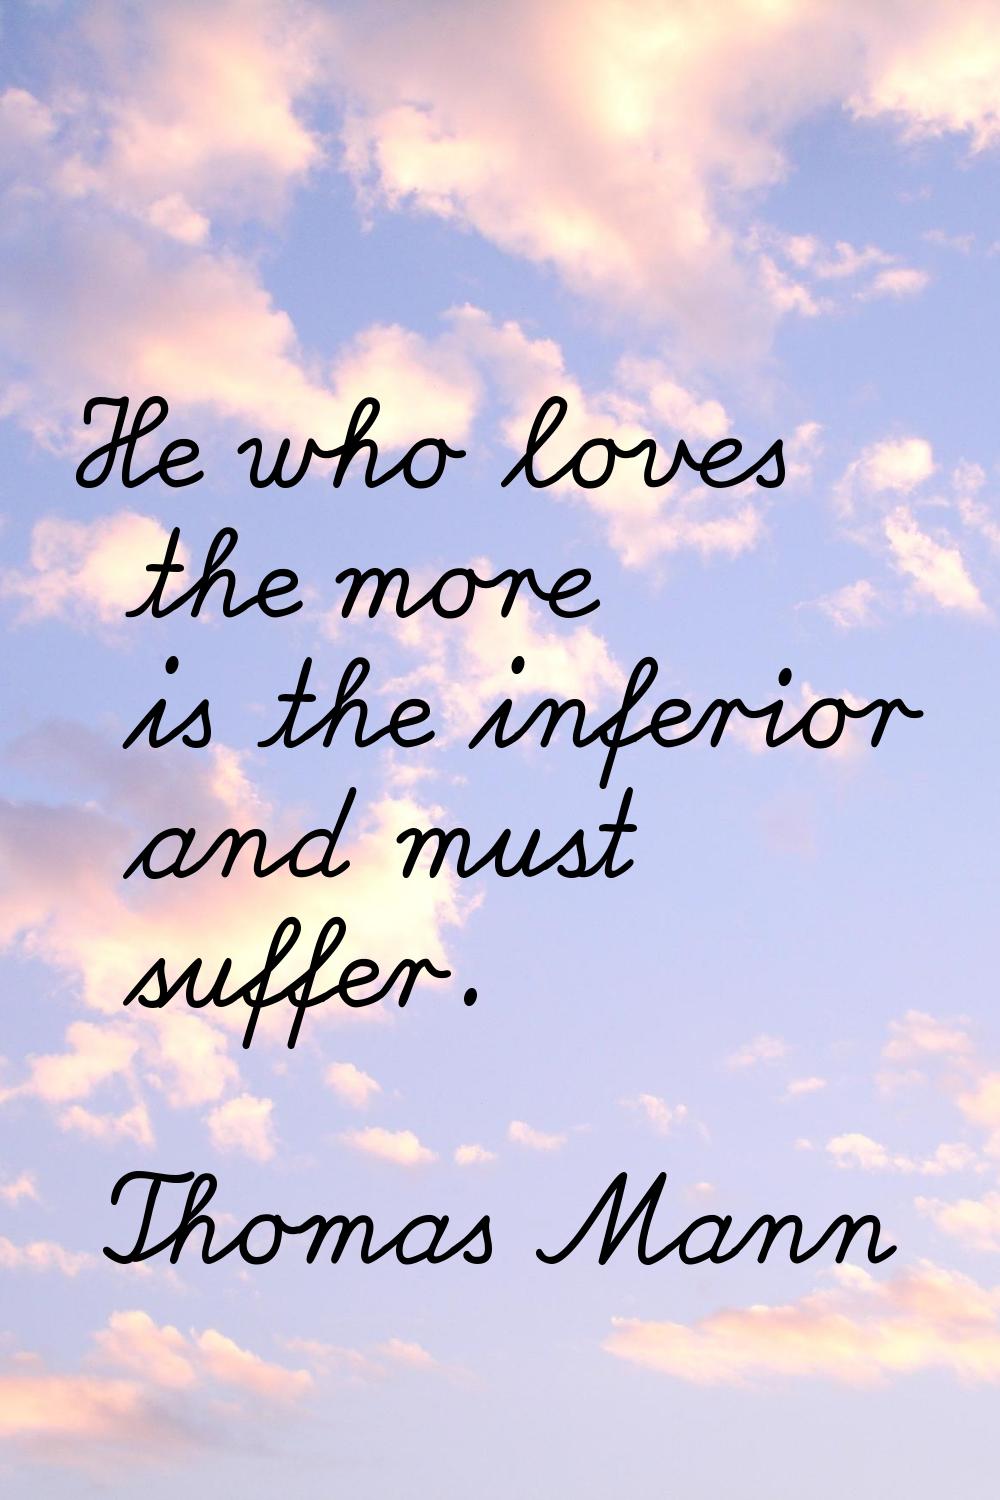 He who loves the more is the inferior and must suffer.